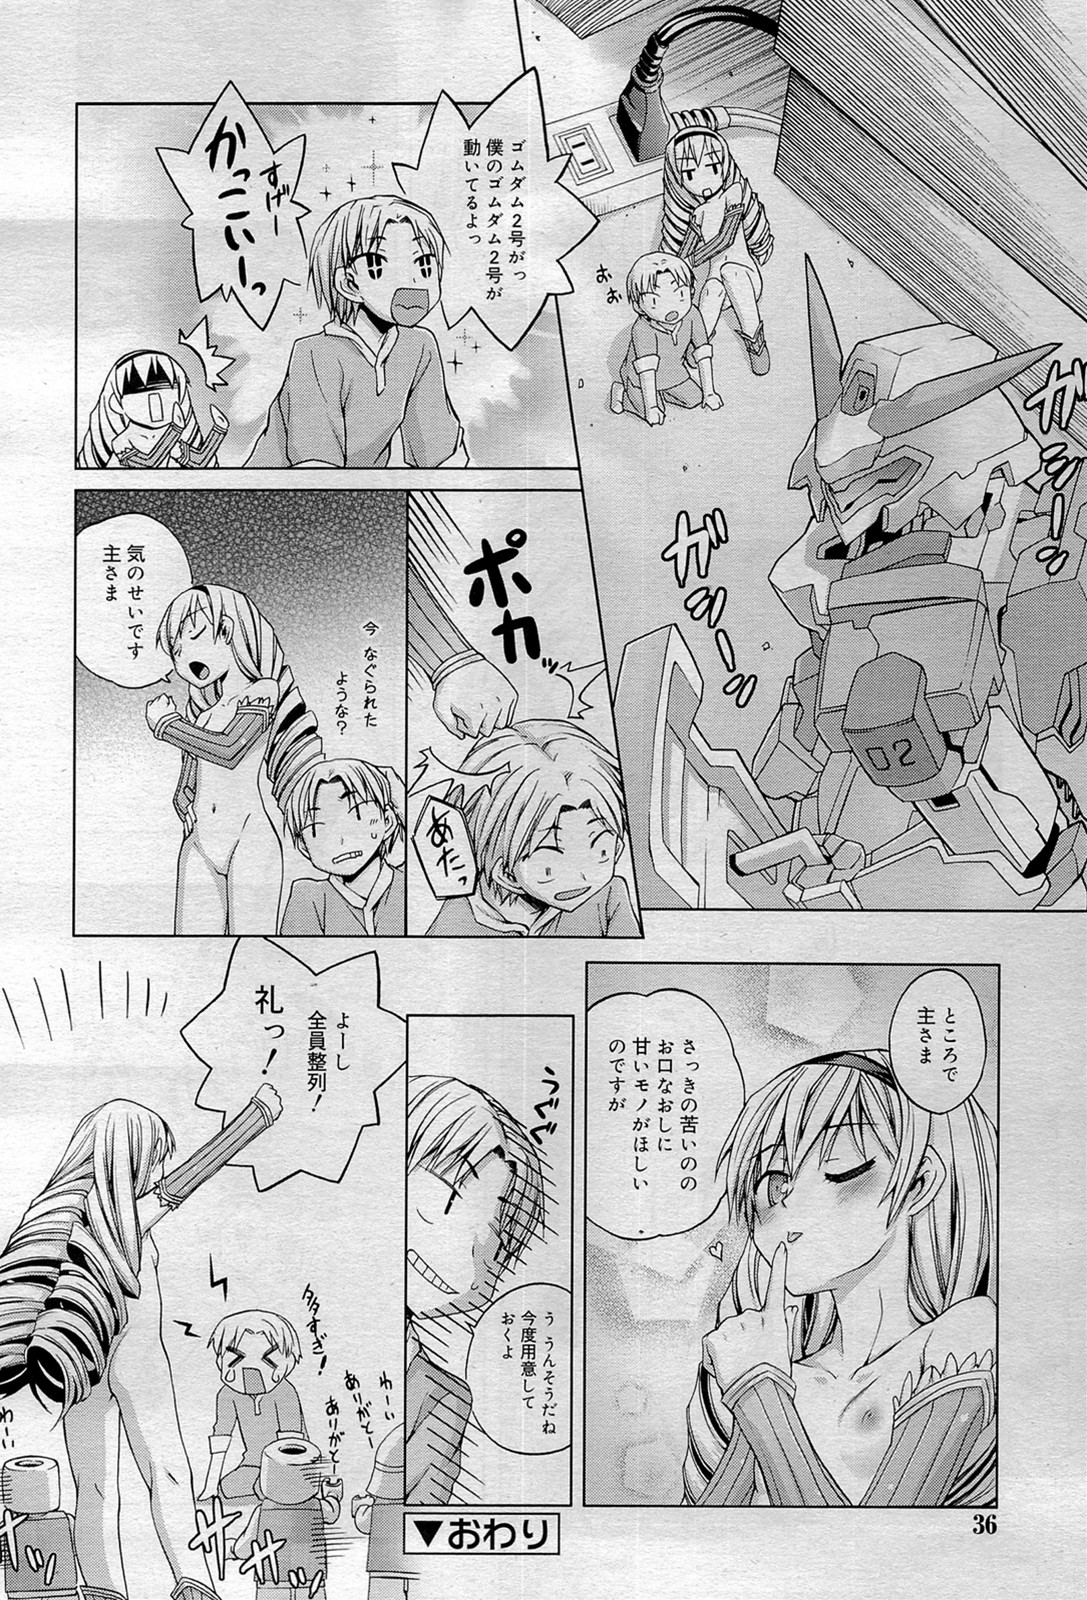 COMIC RiN 2012-01 page 36 full